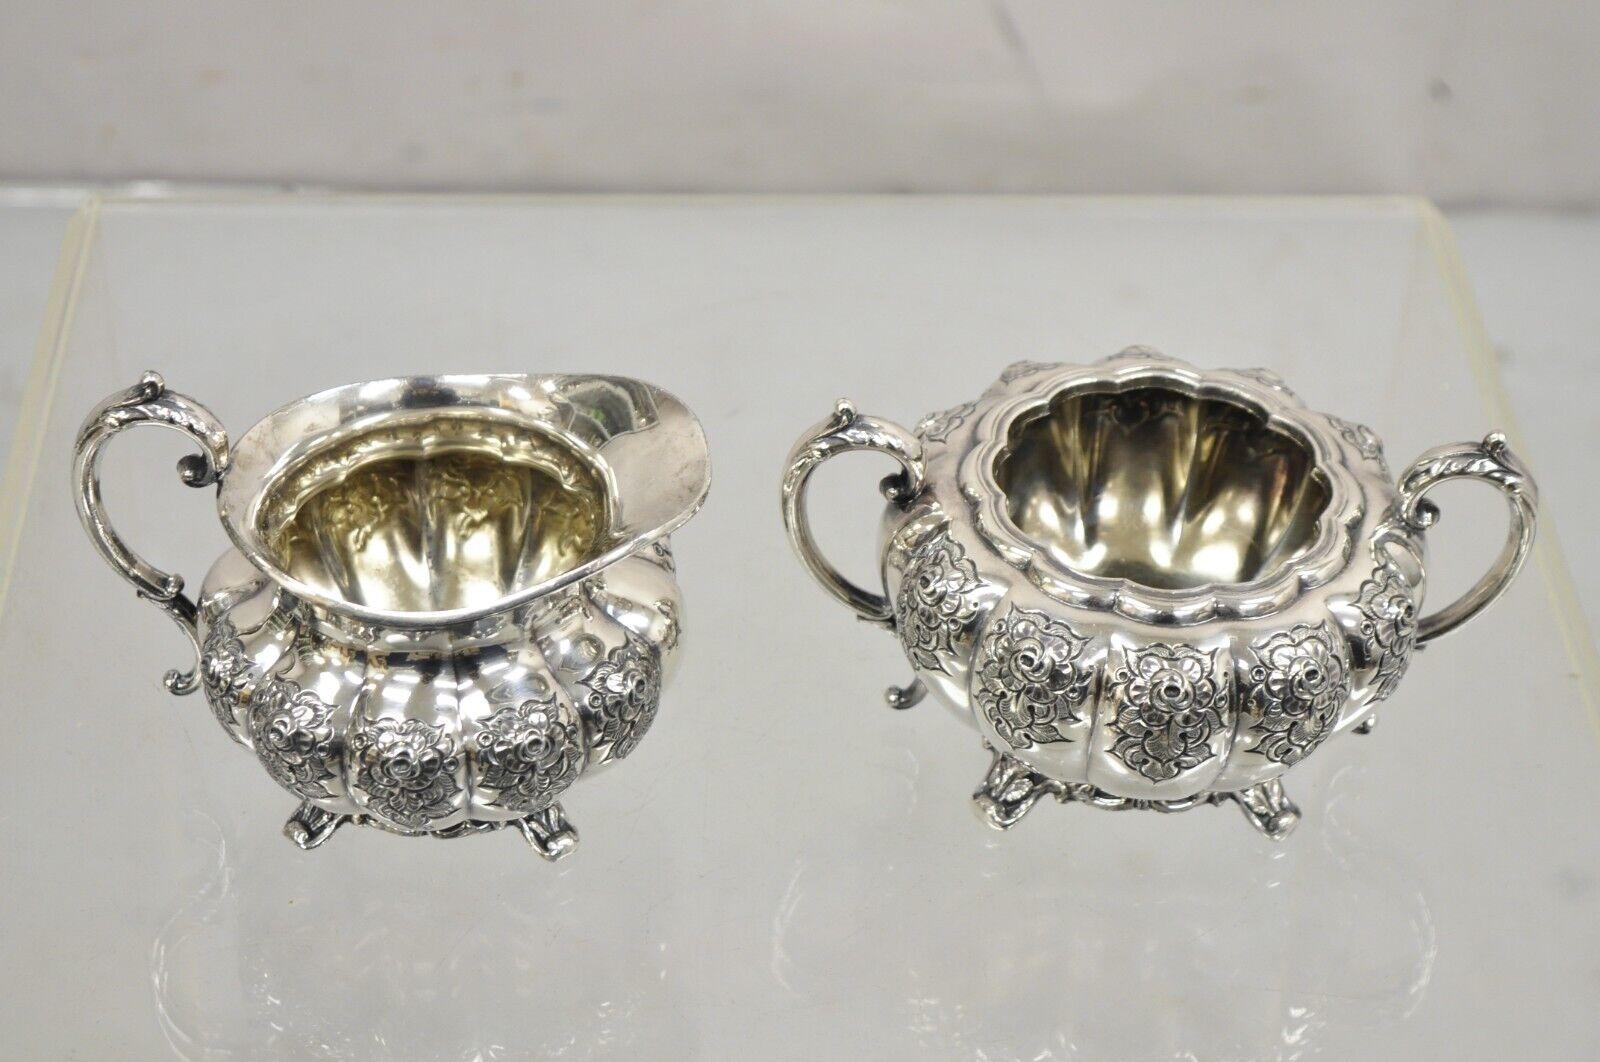 Vintage Victorian 1881 Rogers Canada Silver Plated Sugar Bowl and Creamer Set For Sale 7